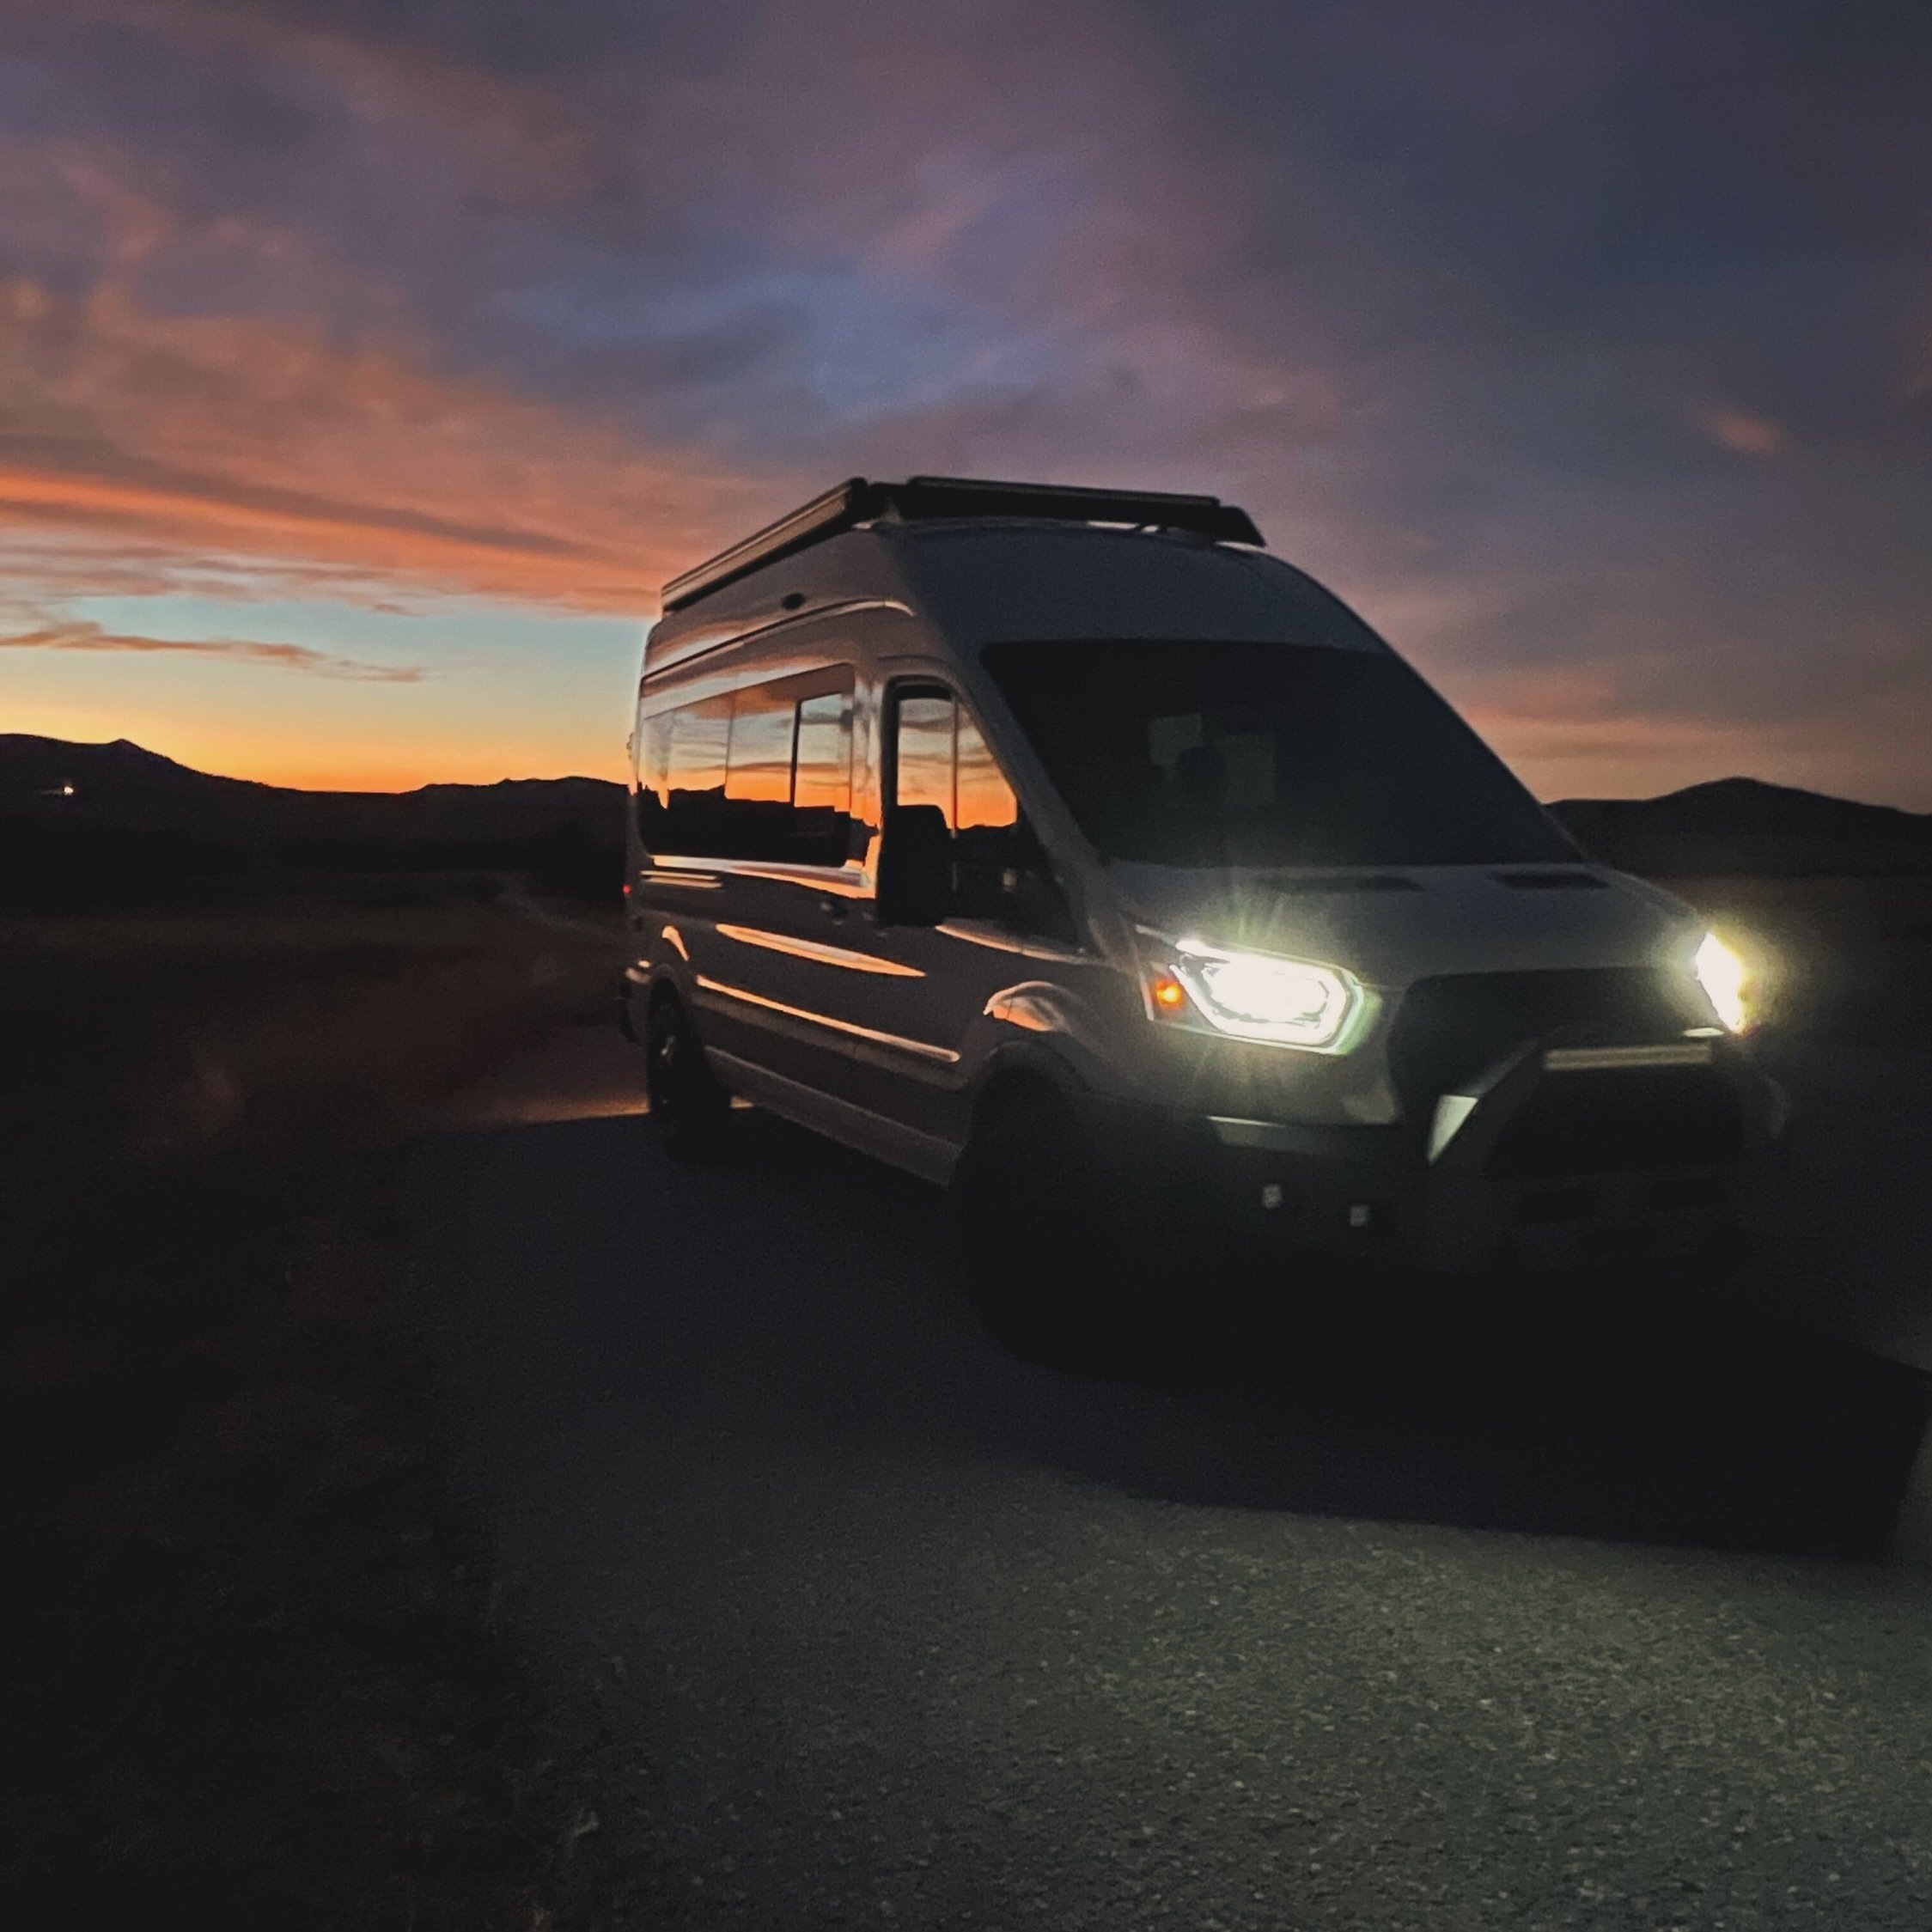 Where are your adventures taking you this weekend? We hope you are out making memories! If you&rsquo;re in our nick of the woods swing by the NWA RV Show &amp; Outdoor Party in Rogers today or tomorrow. We&rsquo;ve got a few rigs on display!
.
.
.
#c